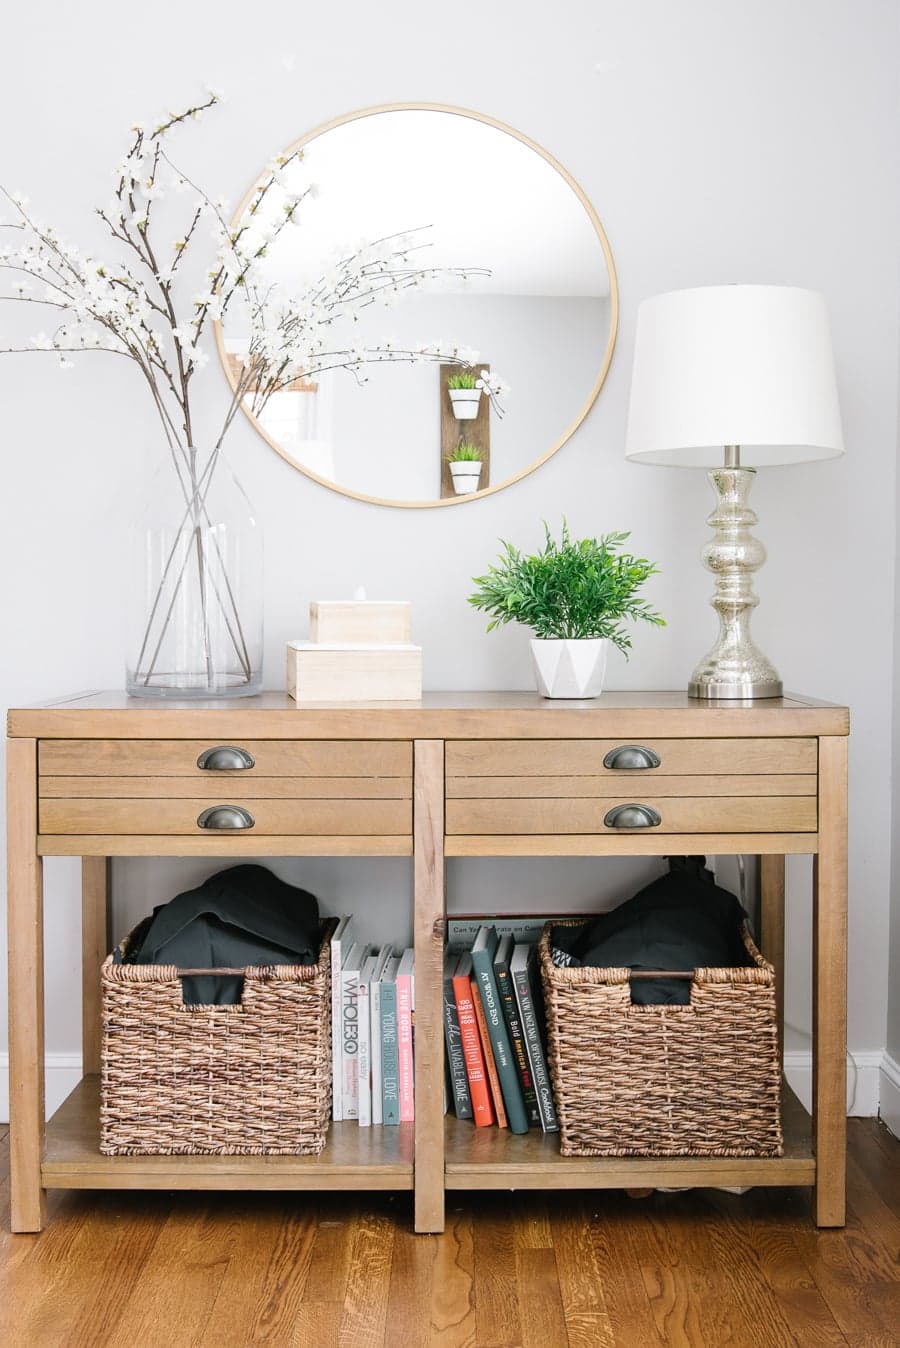 A wooden console table with four narrow drawers, and a shelf below holding 2 large wicker baskets